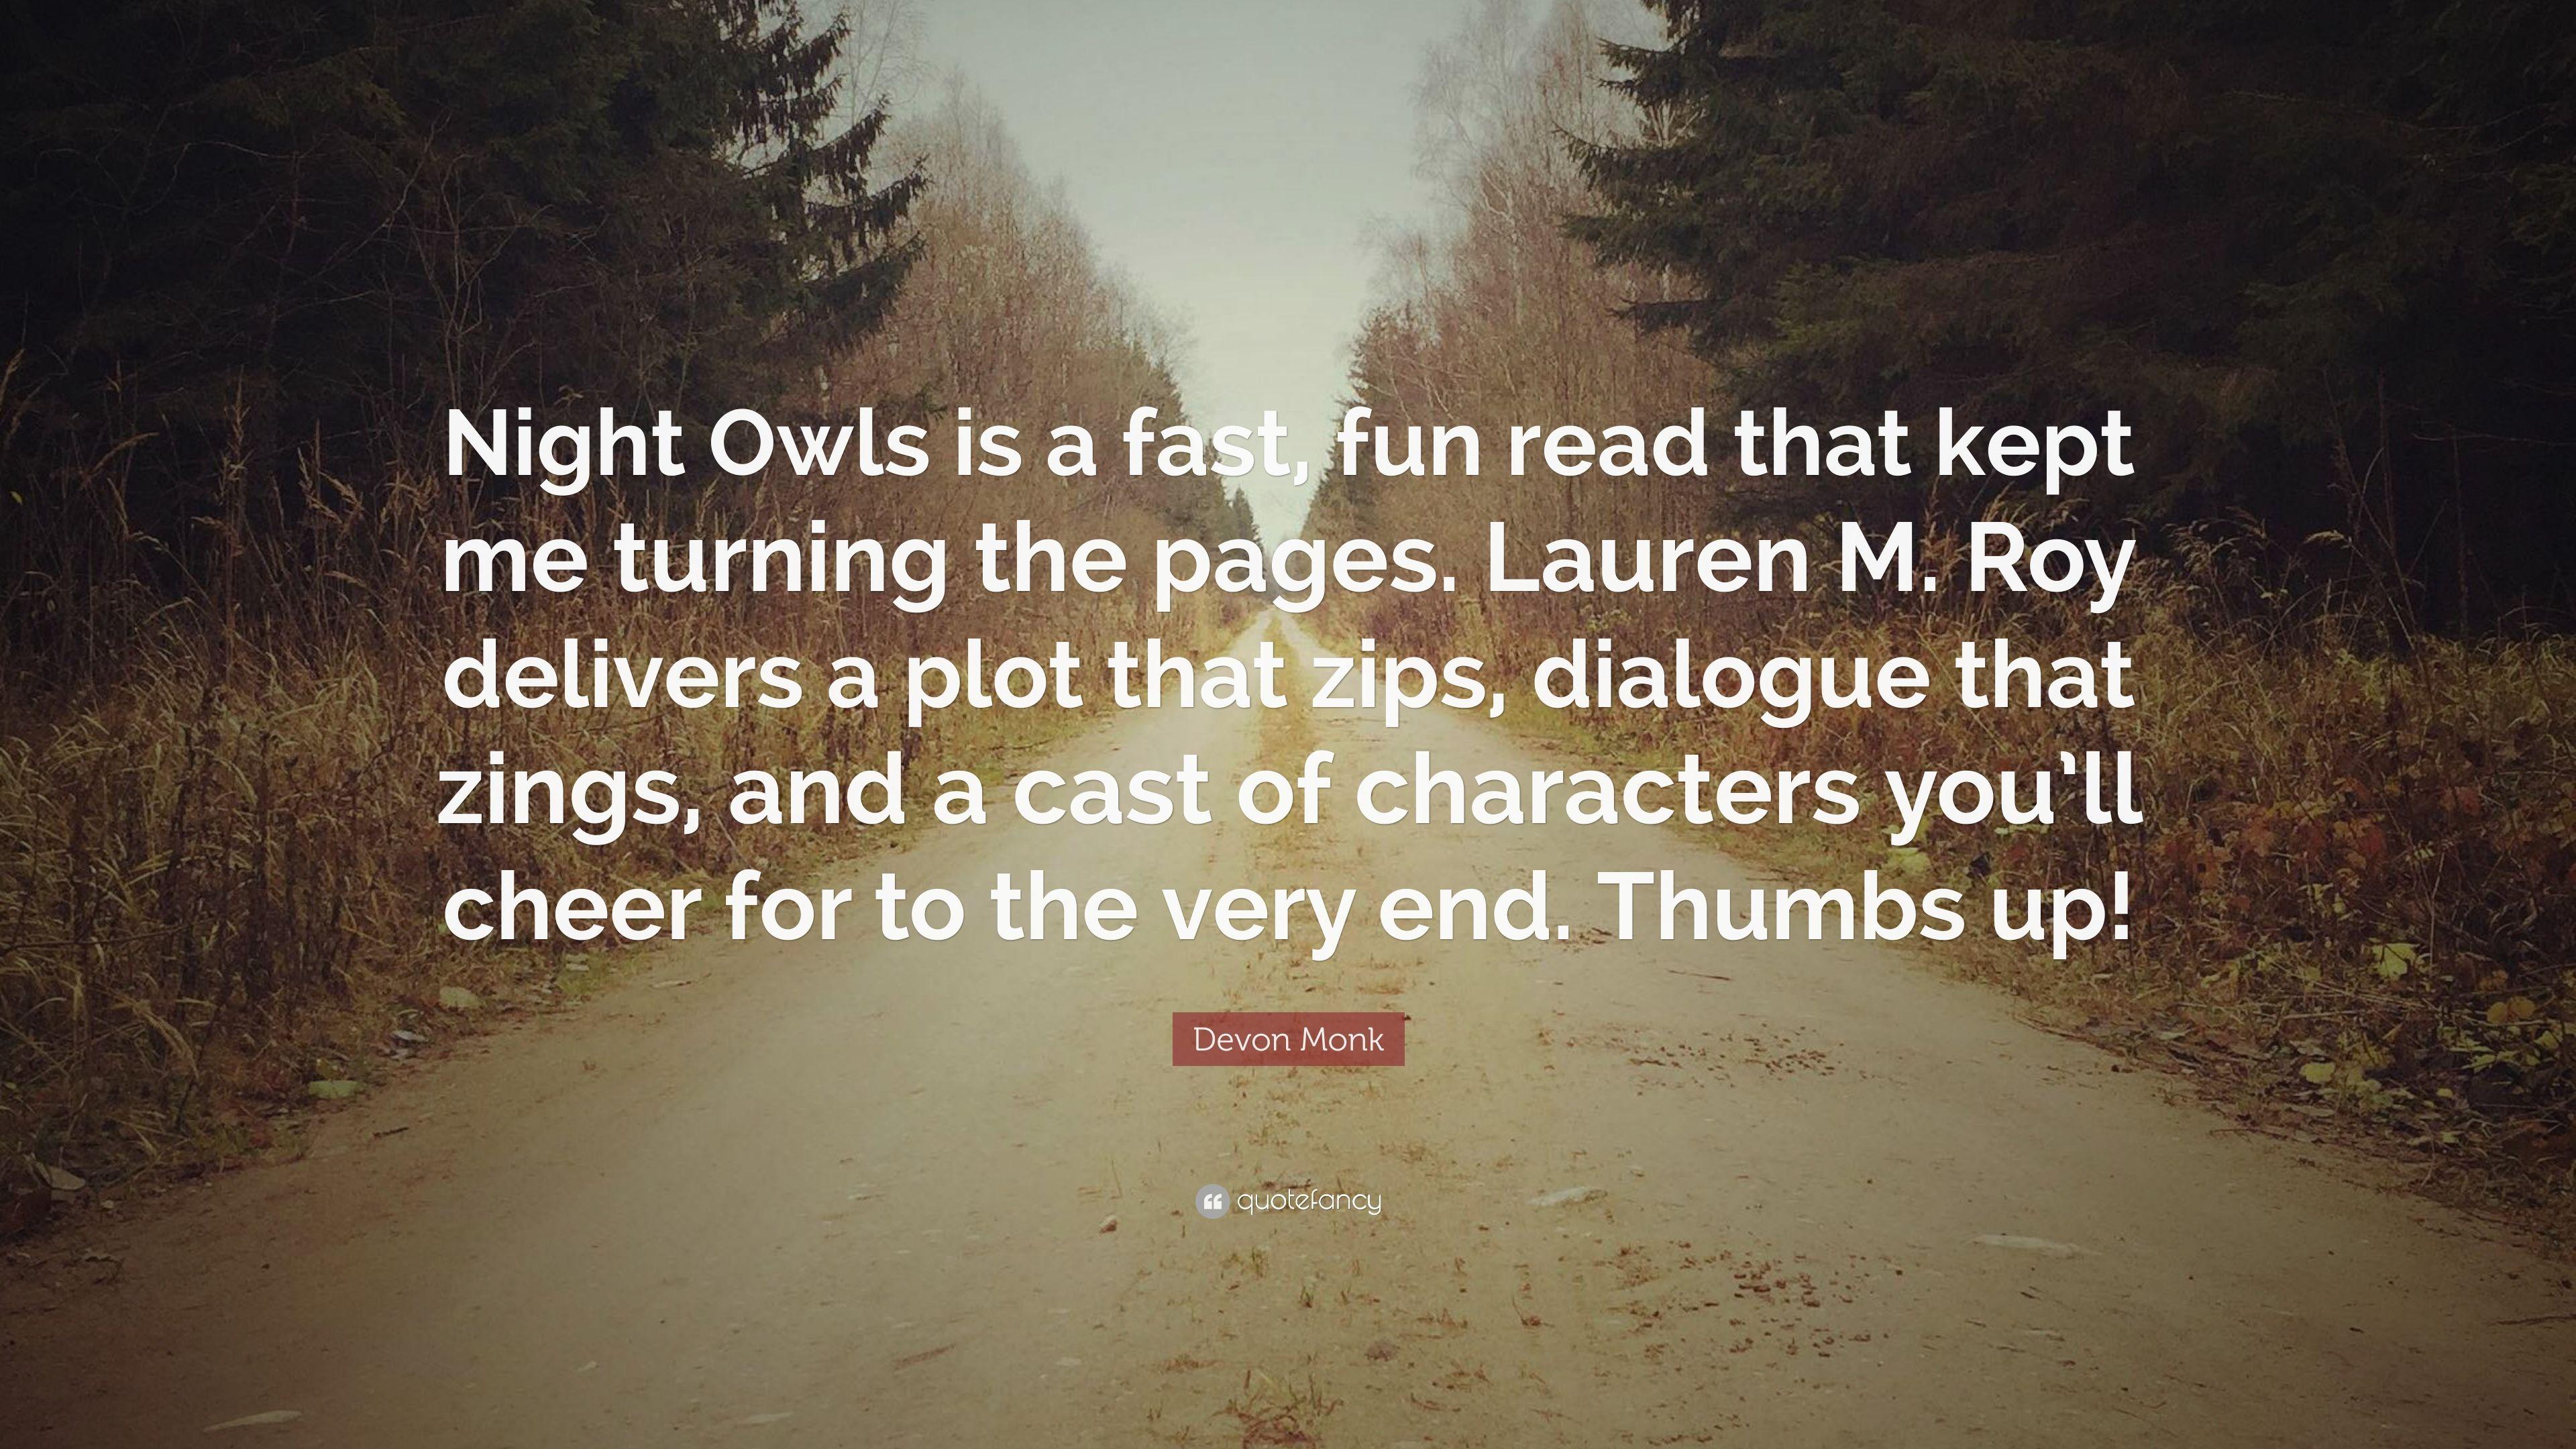 Devon Monk Quote: “Night Owls is a fast, fun read that kept me